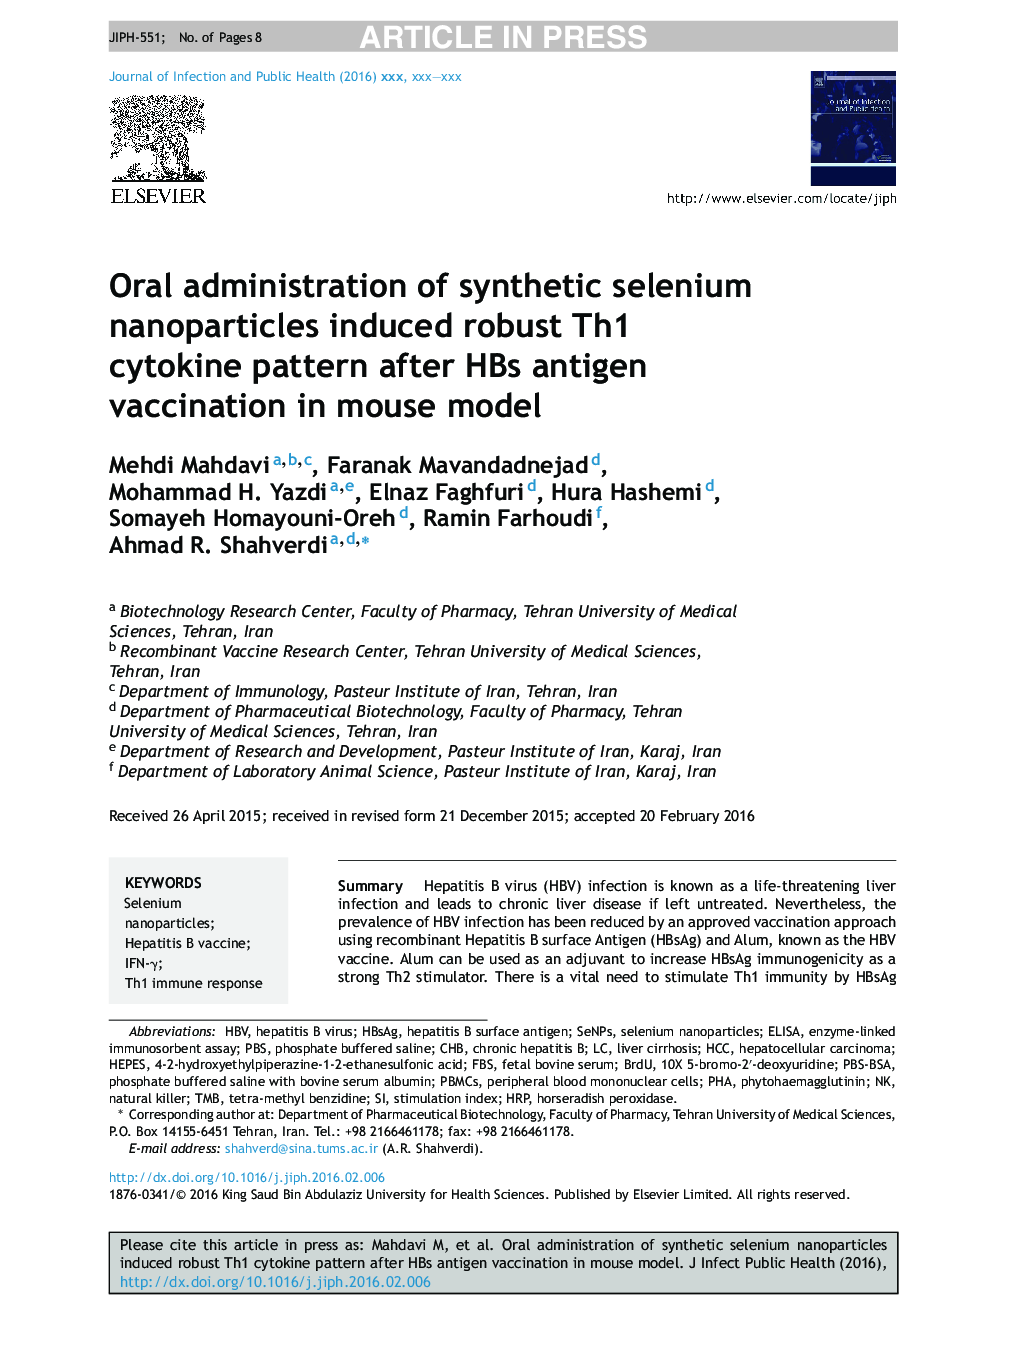 Oral administration of synthetic selenium nanoparticles induced robust Th1 cytokine pattern after HBs antigen vaccination in mouse model